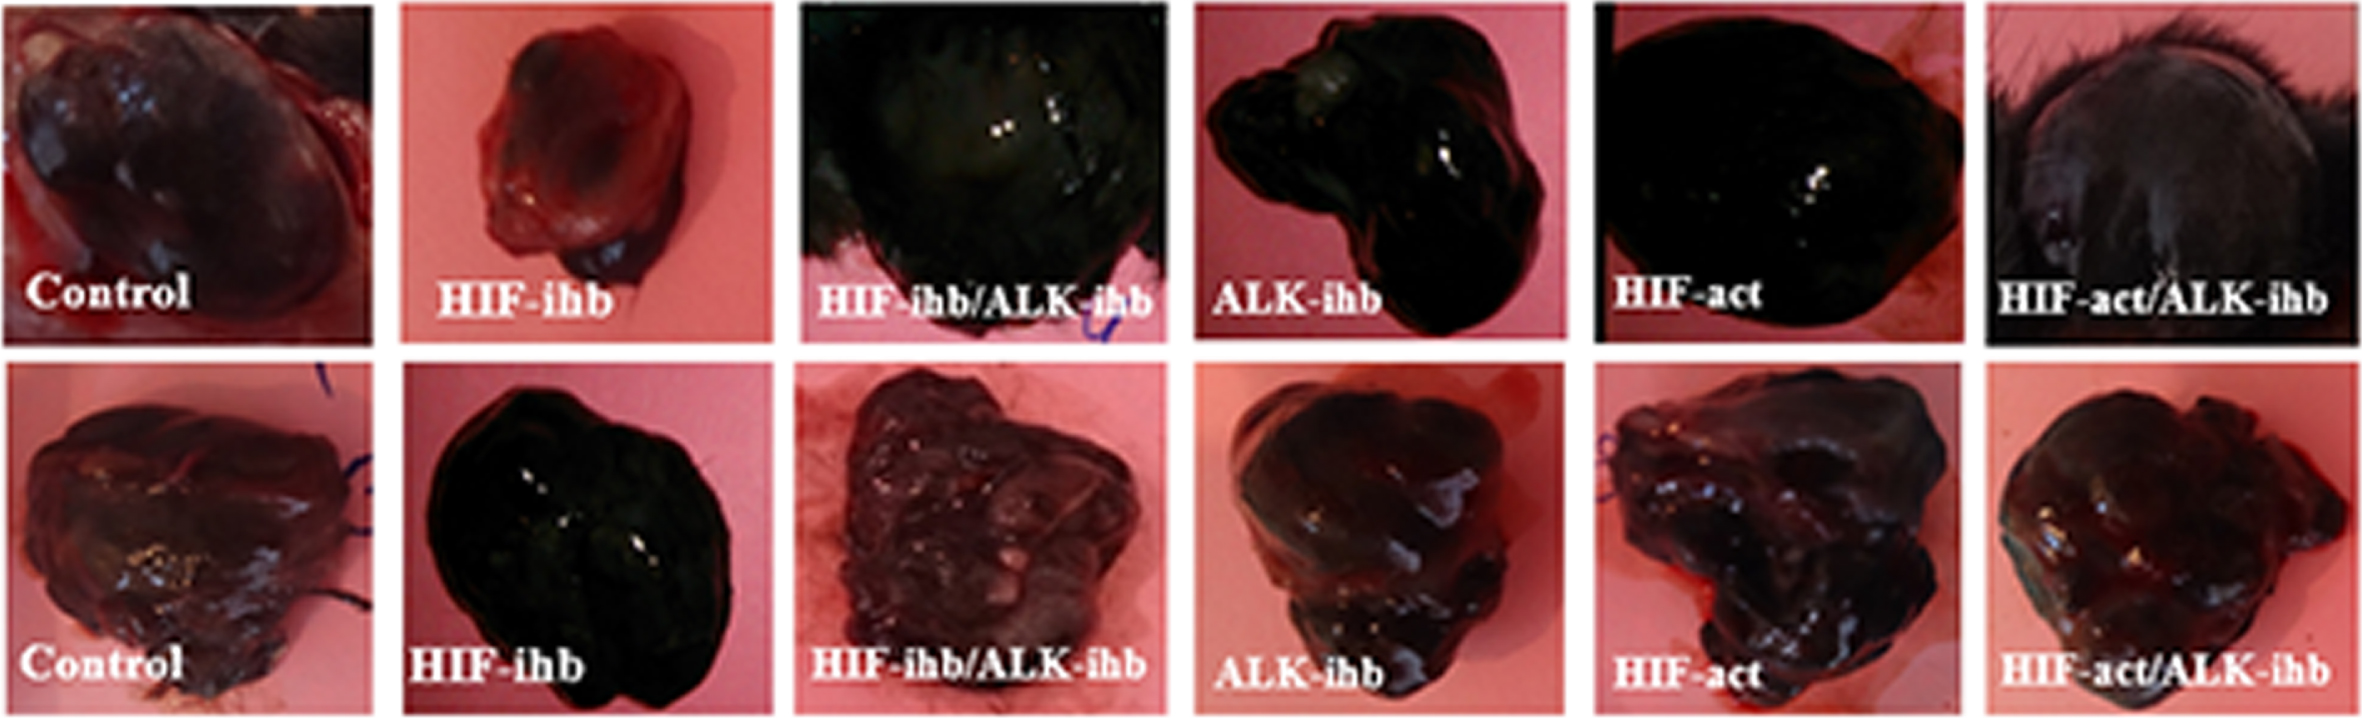 Typical photos of isolated tumors from each group.